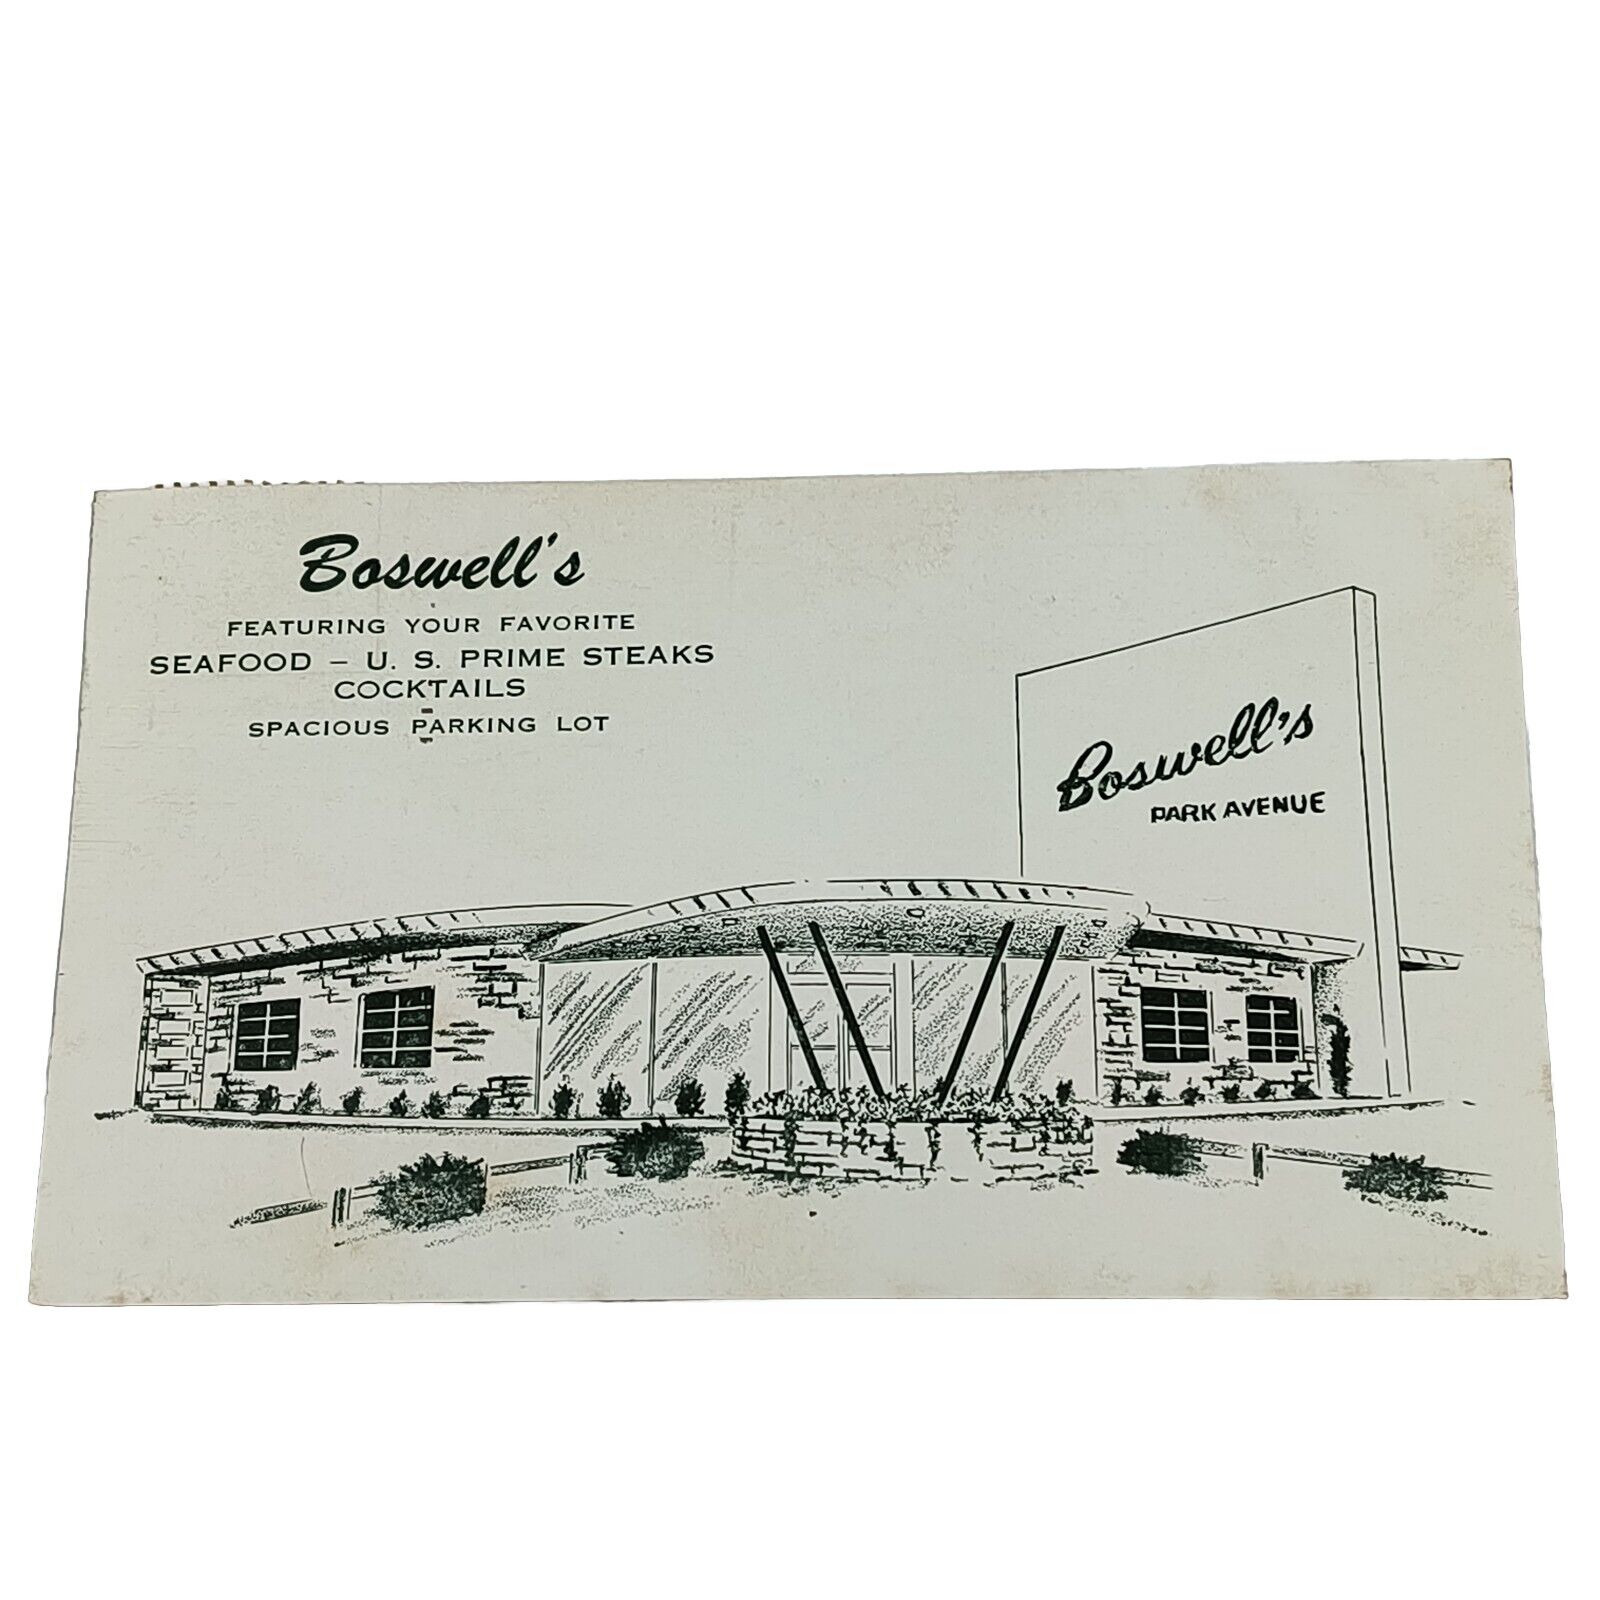 Boswell\'s Park Avenue Restaurant Paducah Kentucky Postcard Posted 2 Cent Stamp 